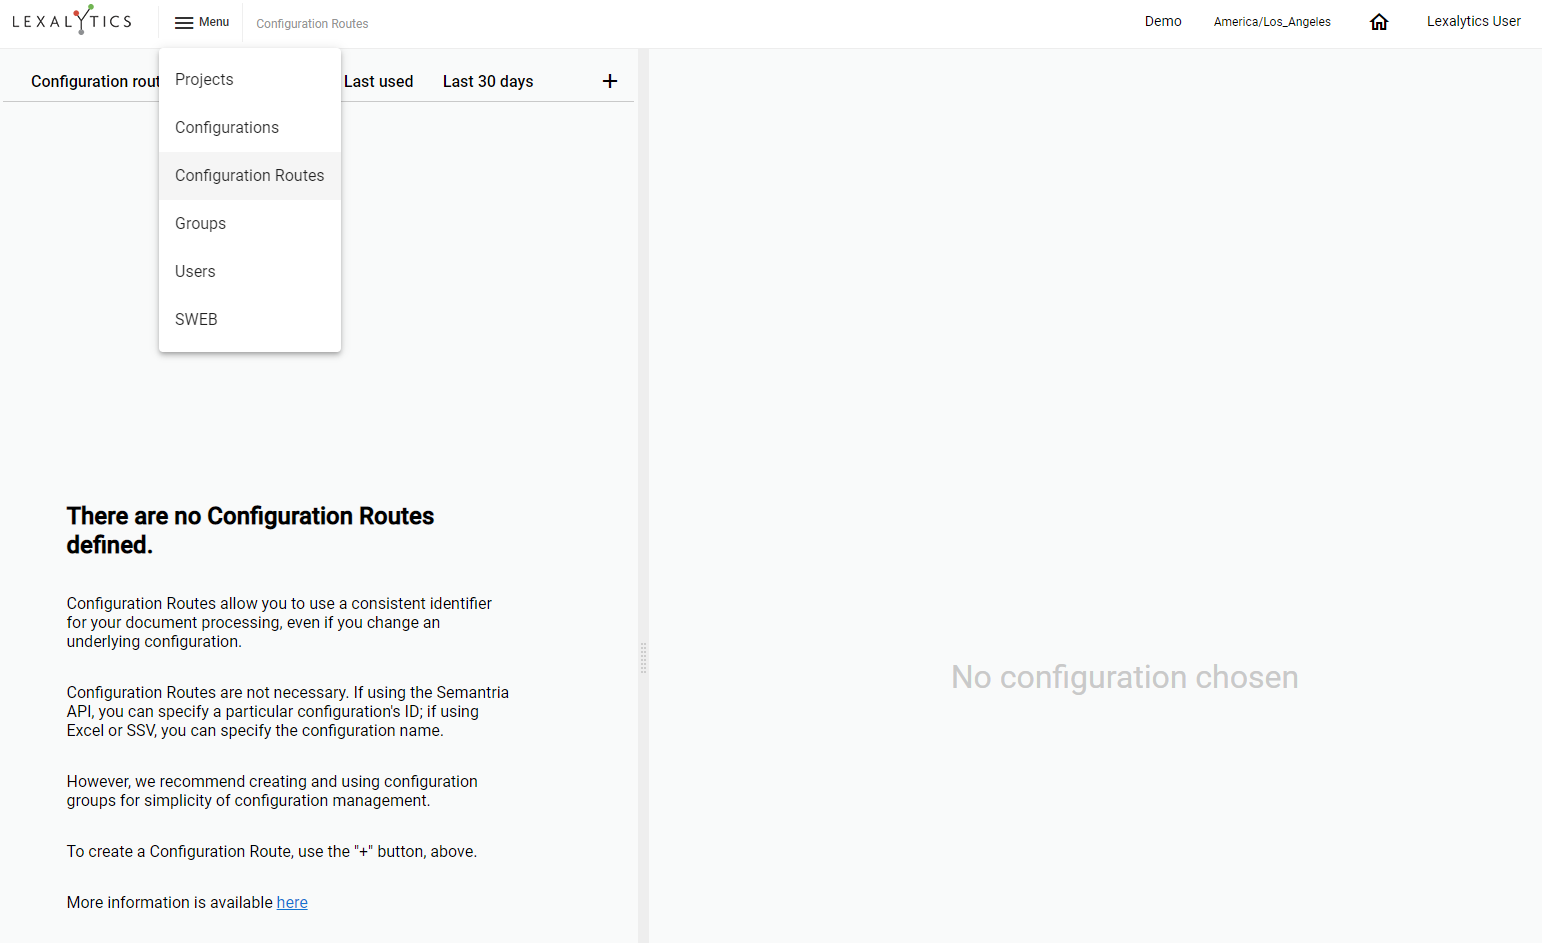 New Configuration Route page